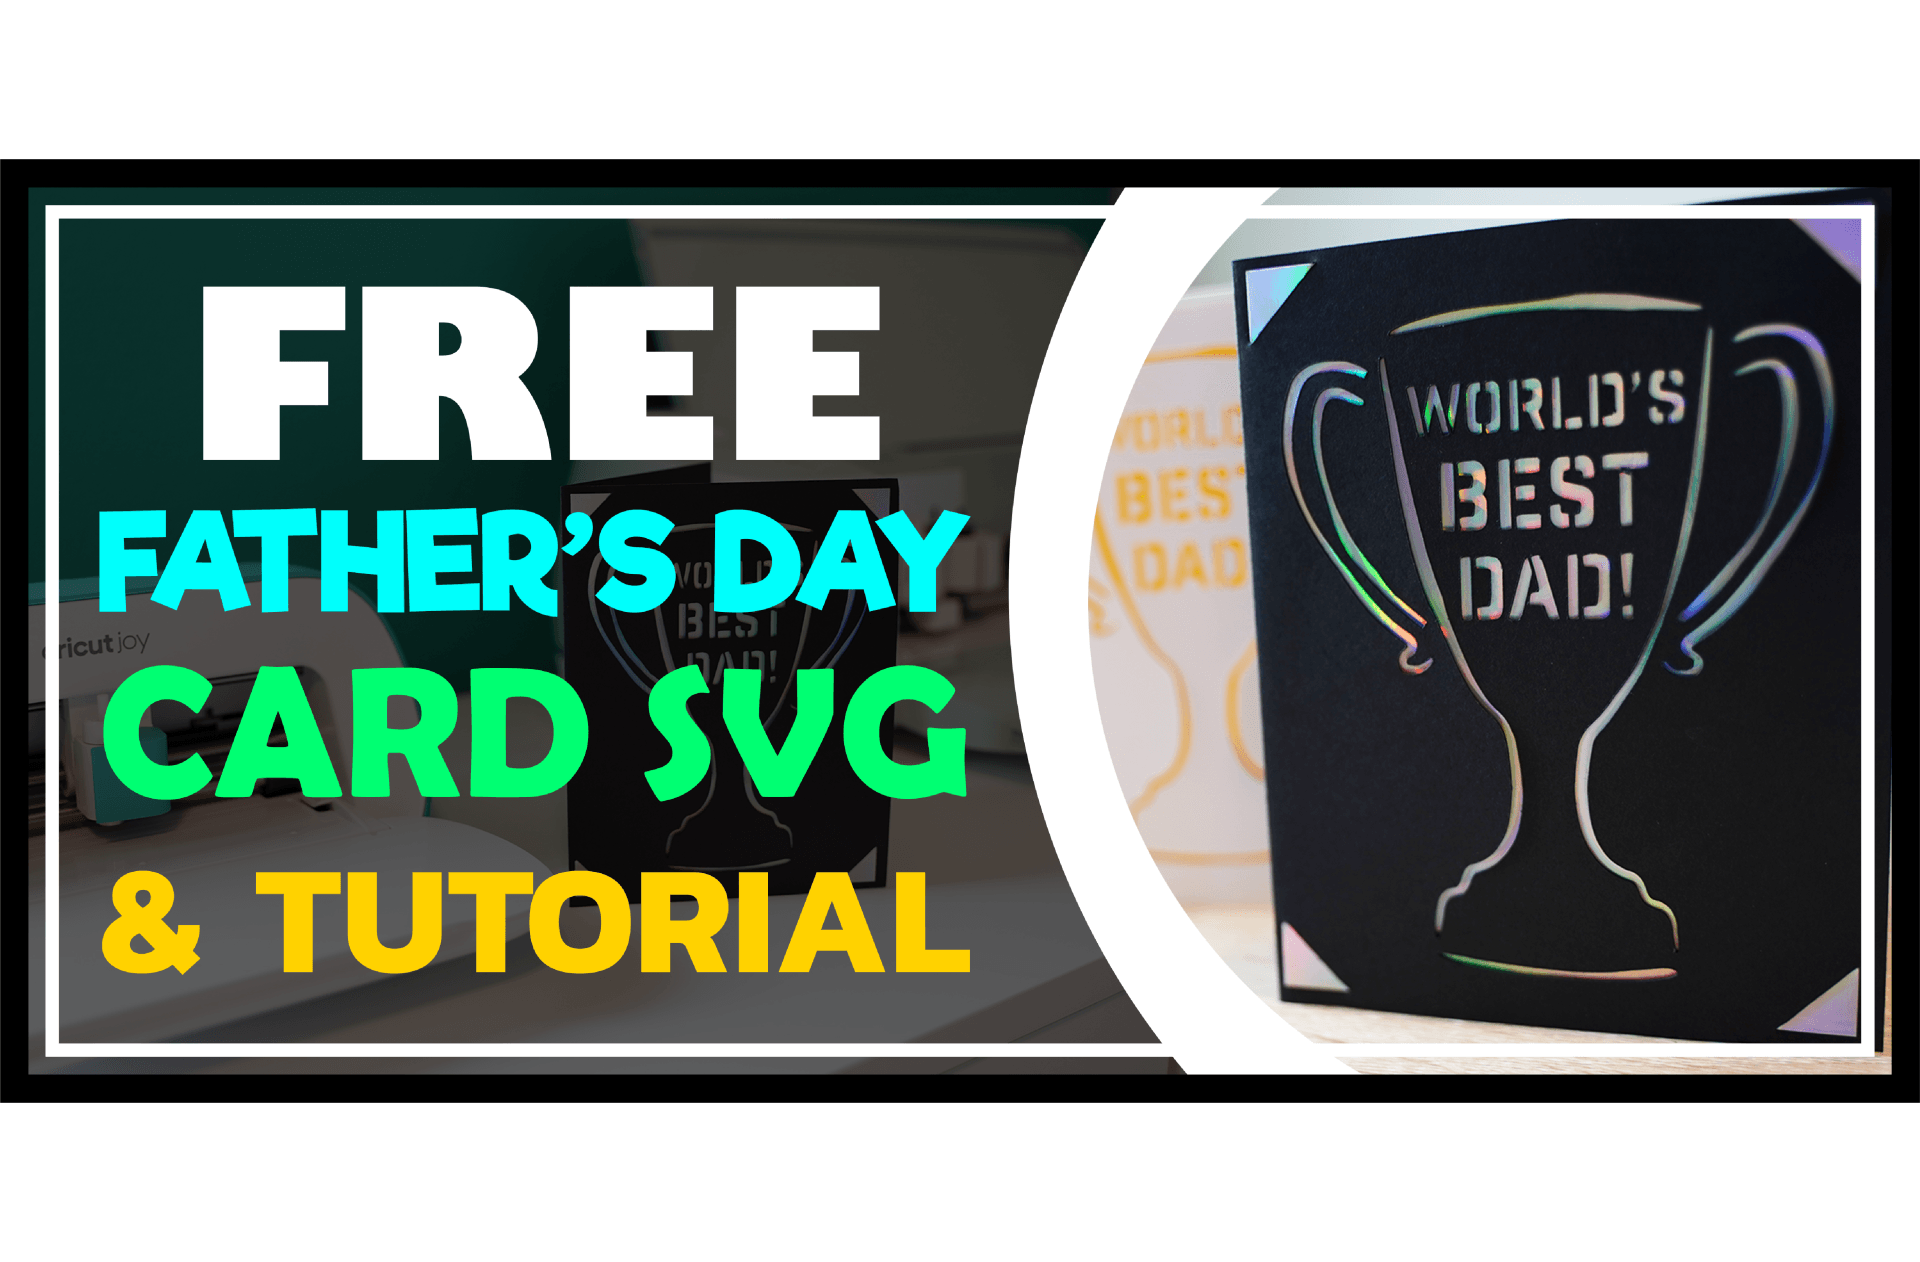 Free Father’s Day Card (Cricut SVG & Tutorial)